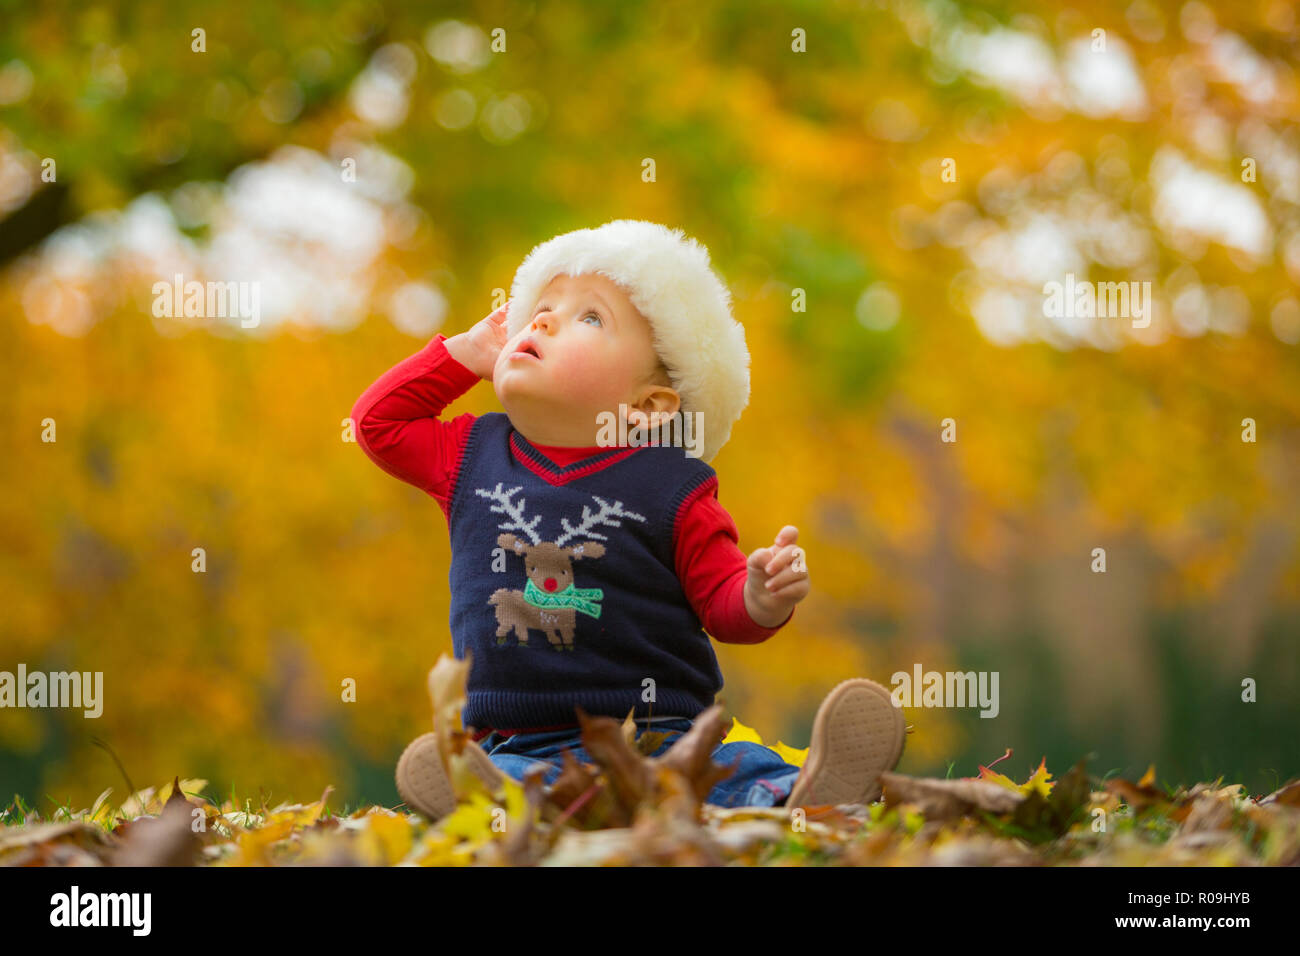 18 month old boy siting in autumn leaves wearing christmas seasonal clothes Stock Photo